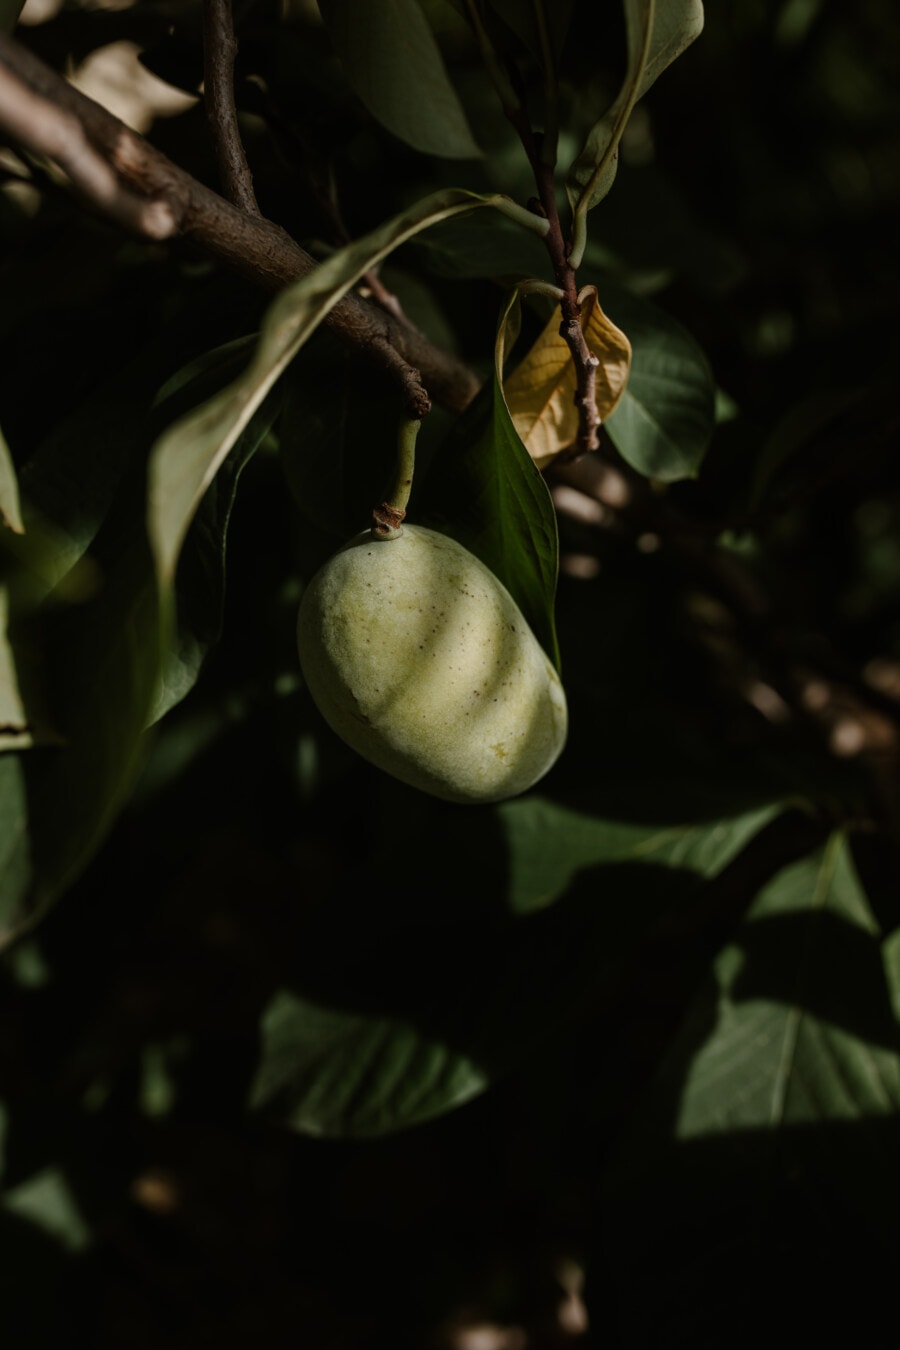 jujuba fruit, Limulus polyphemus, fruit tree, close-up, shadow, dark green, branches, darkness, orchard, leaf, produce